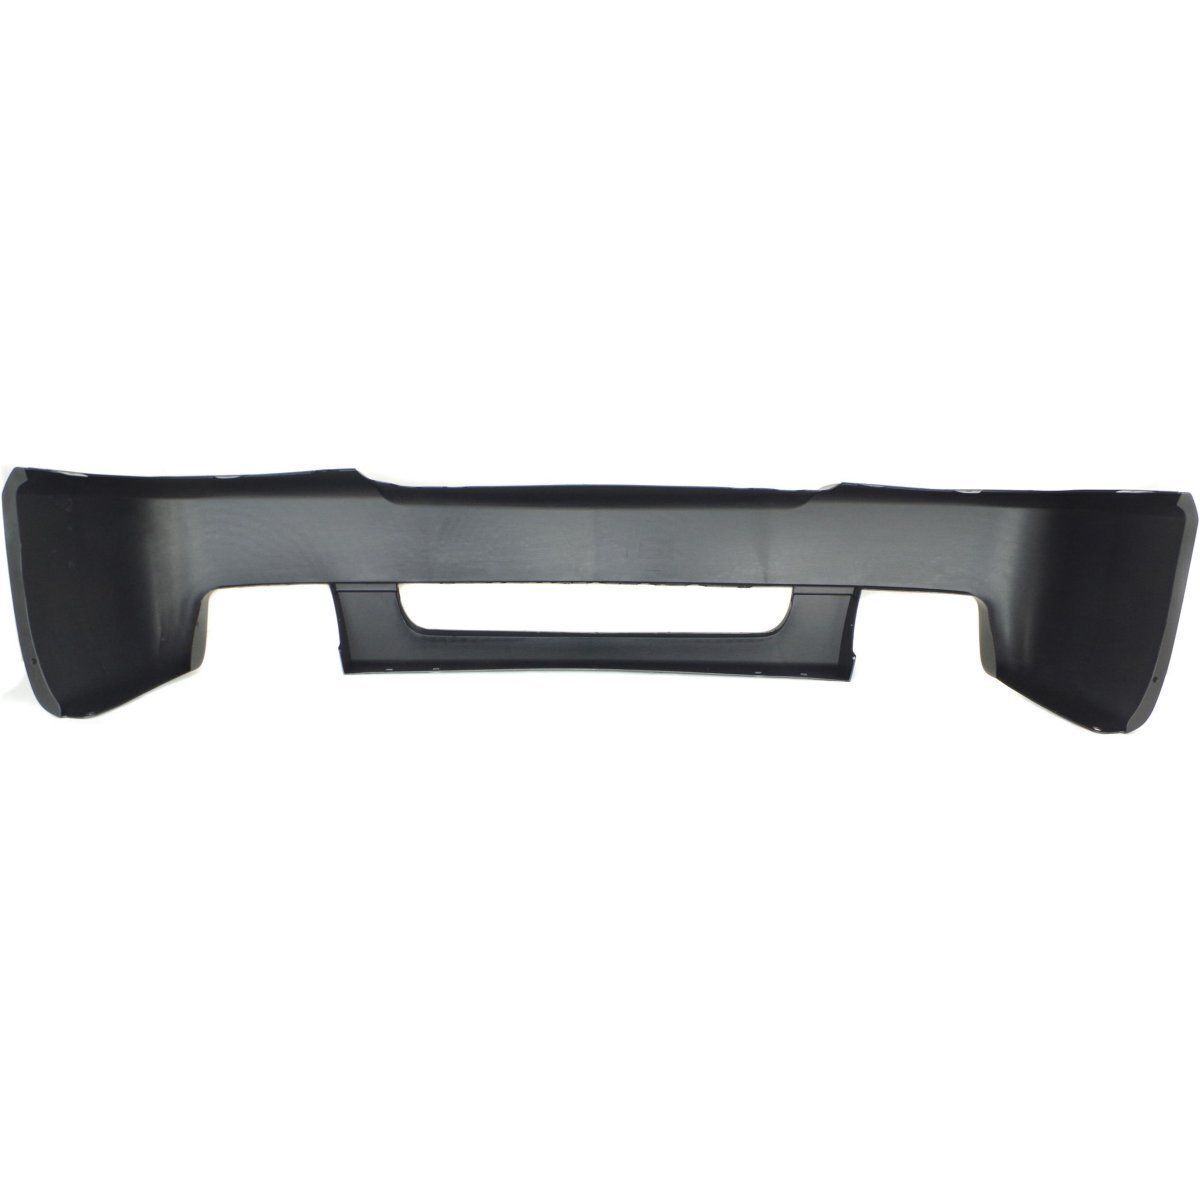 2003-2007 CHEVY SILVERADO; Front Bumper Cover; SS Model PTM/ Painted to Match